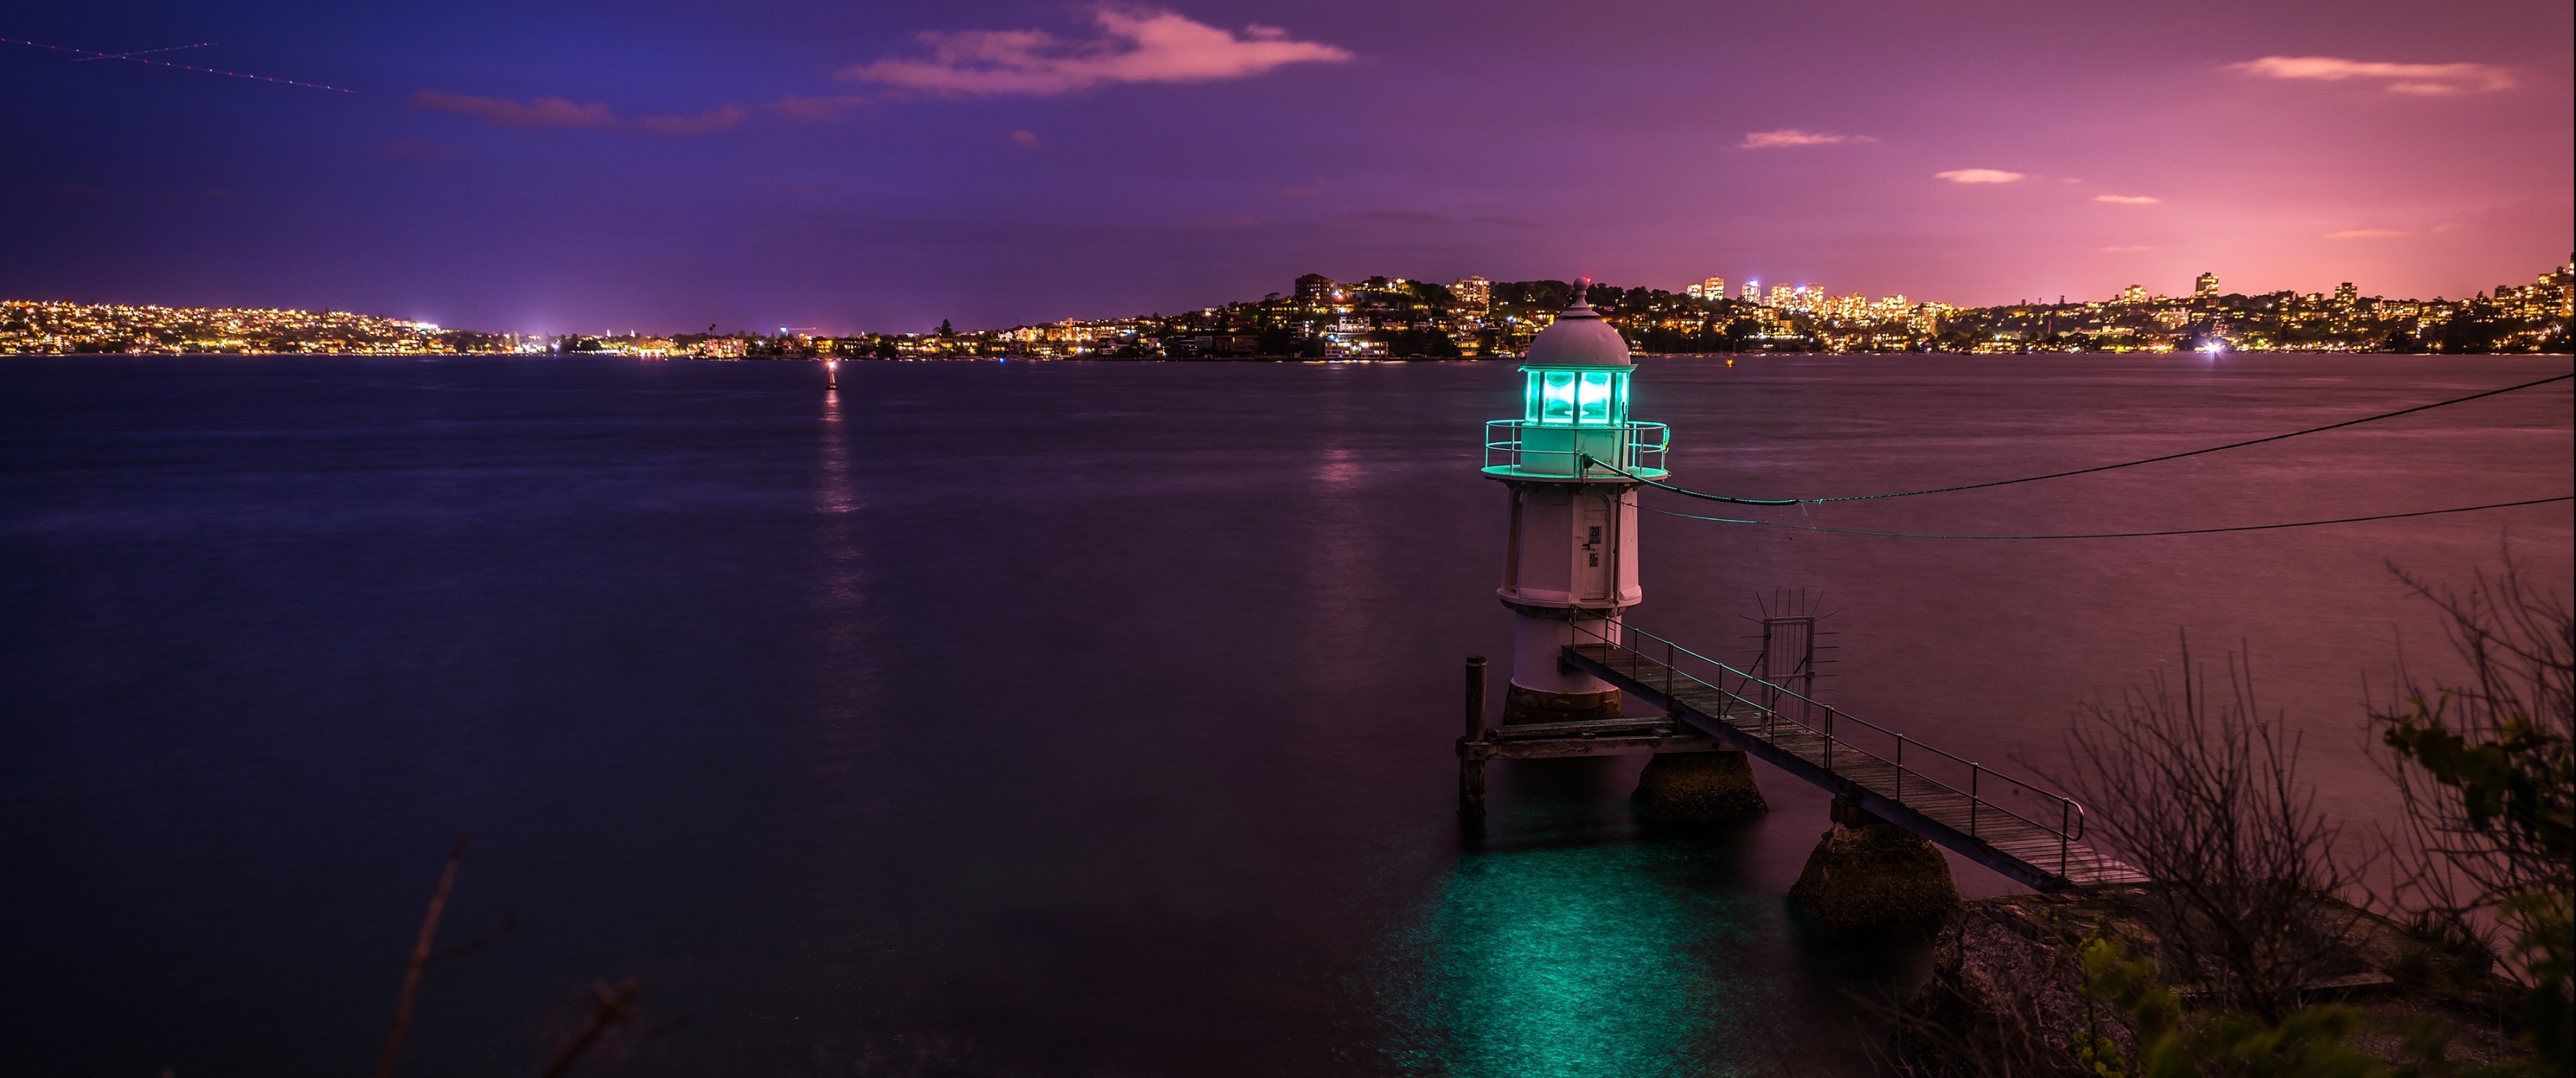 General 3440x1440 lighthouse harbor night outdoors city lights low light ultrawide water sea